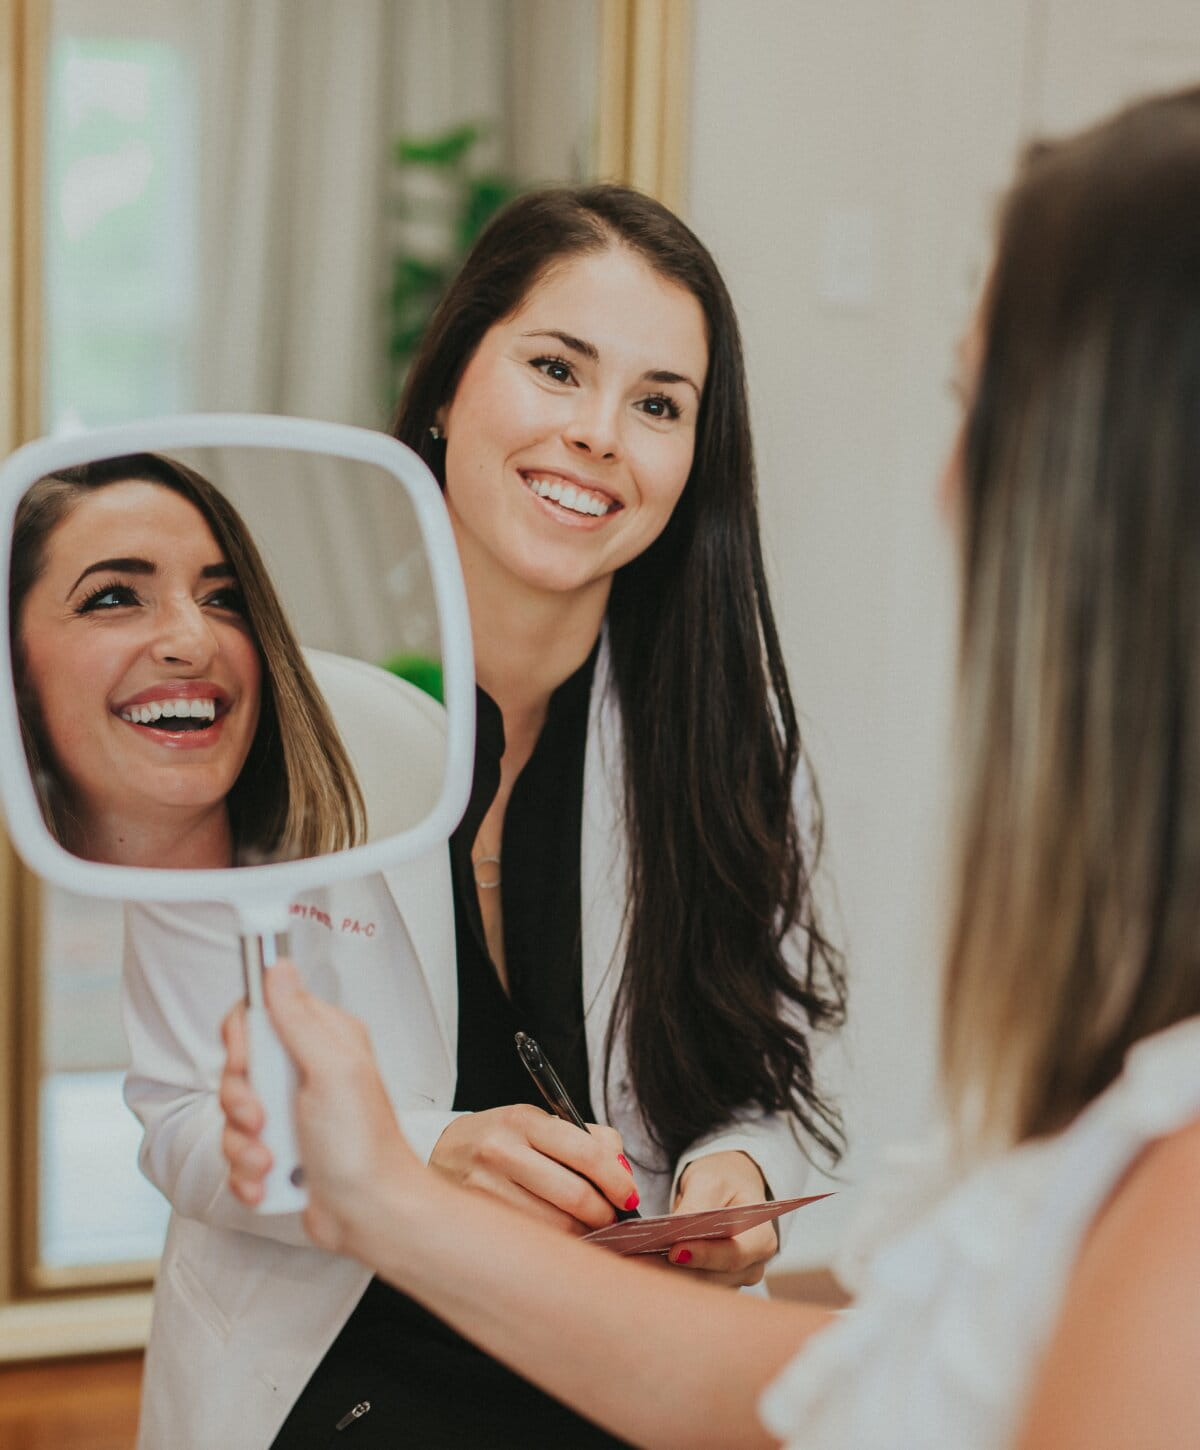 female patient model smiling in the mirror with female doctor smiling.